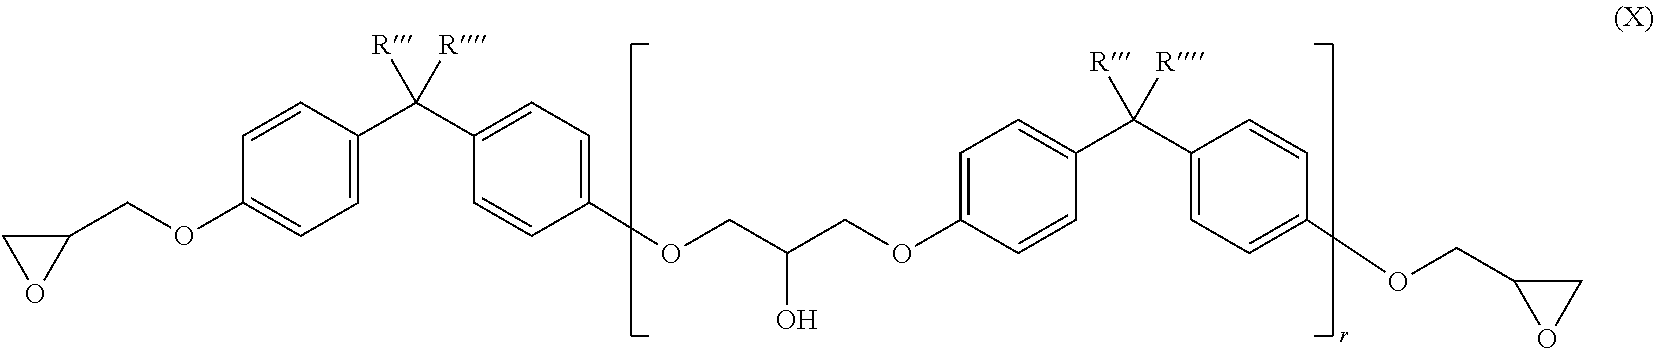 Polycarboxylate ethers used as dispersing agents for epoxy resins